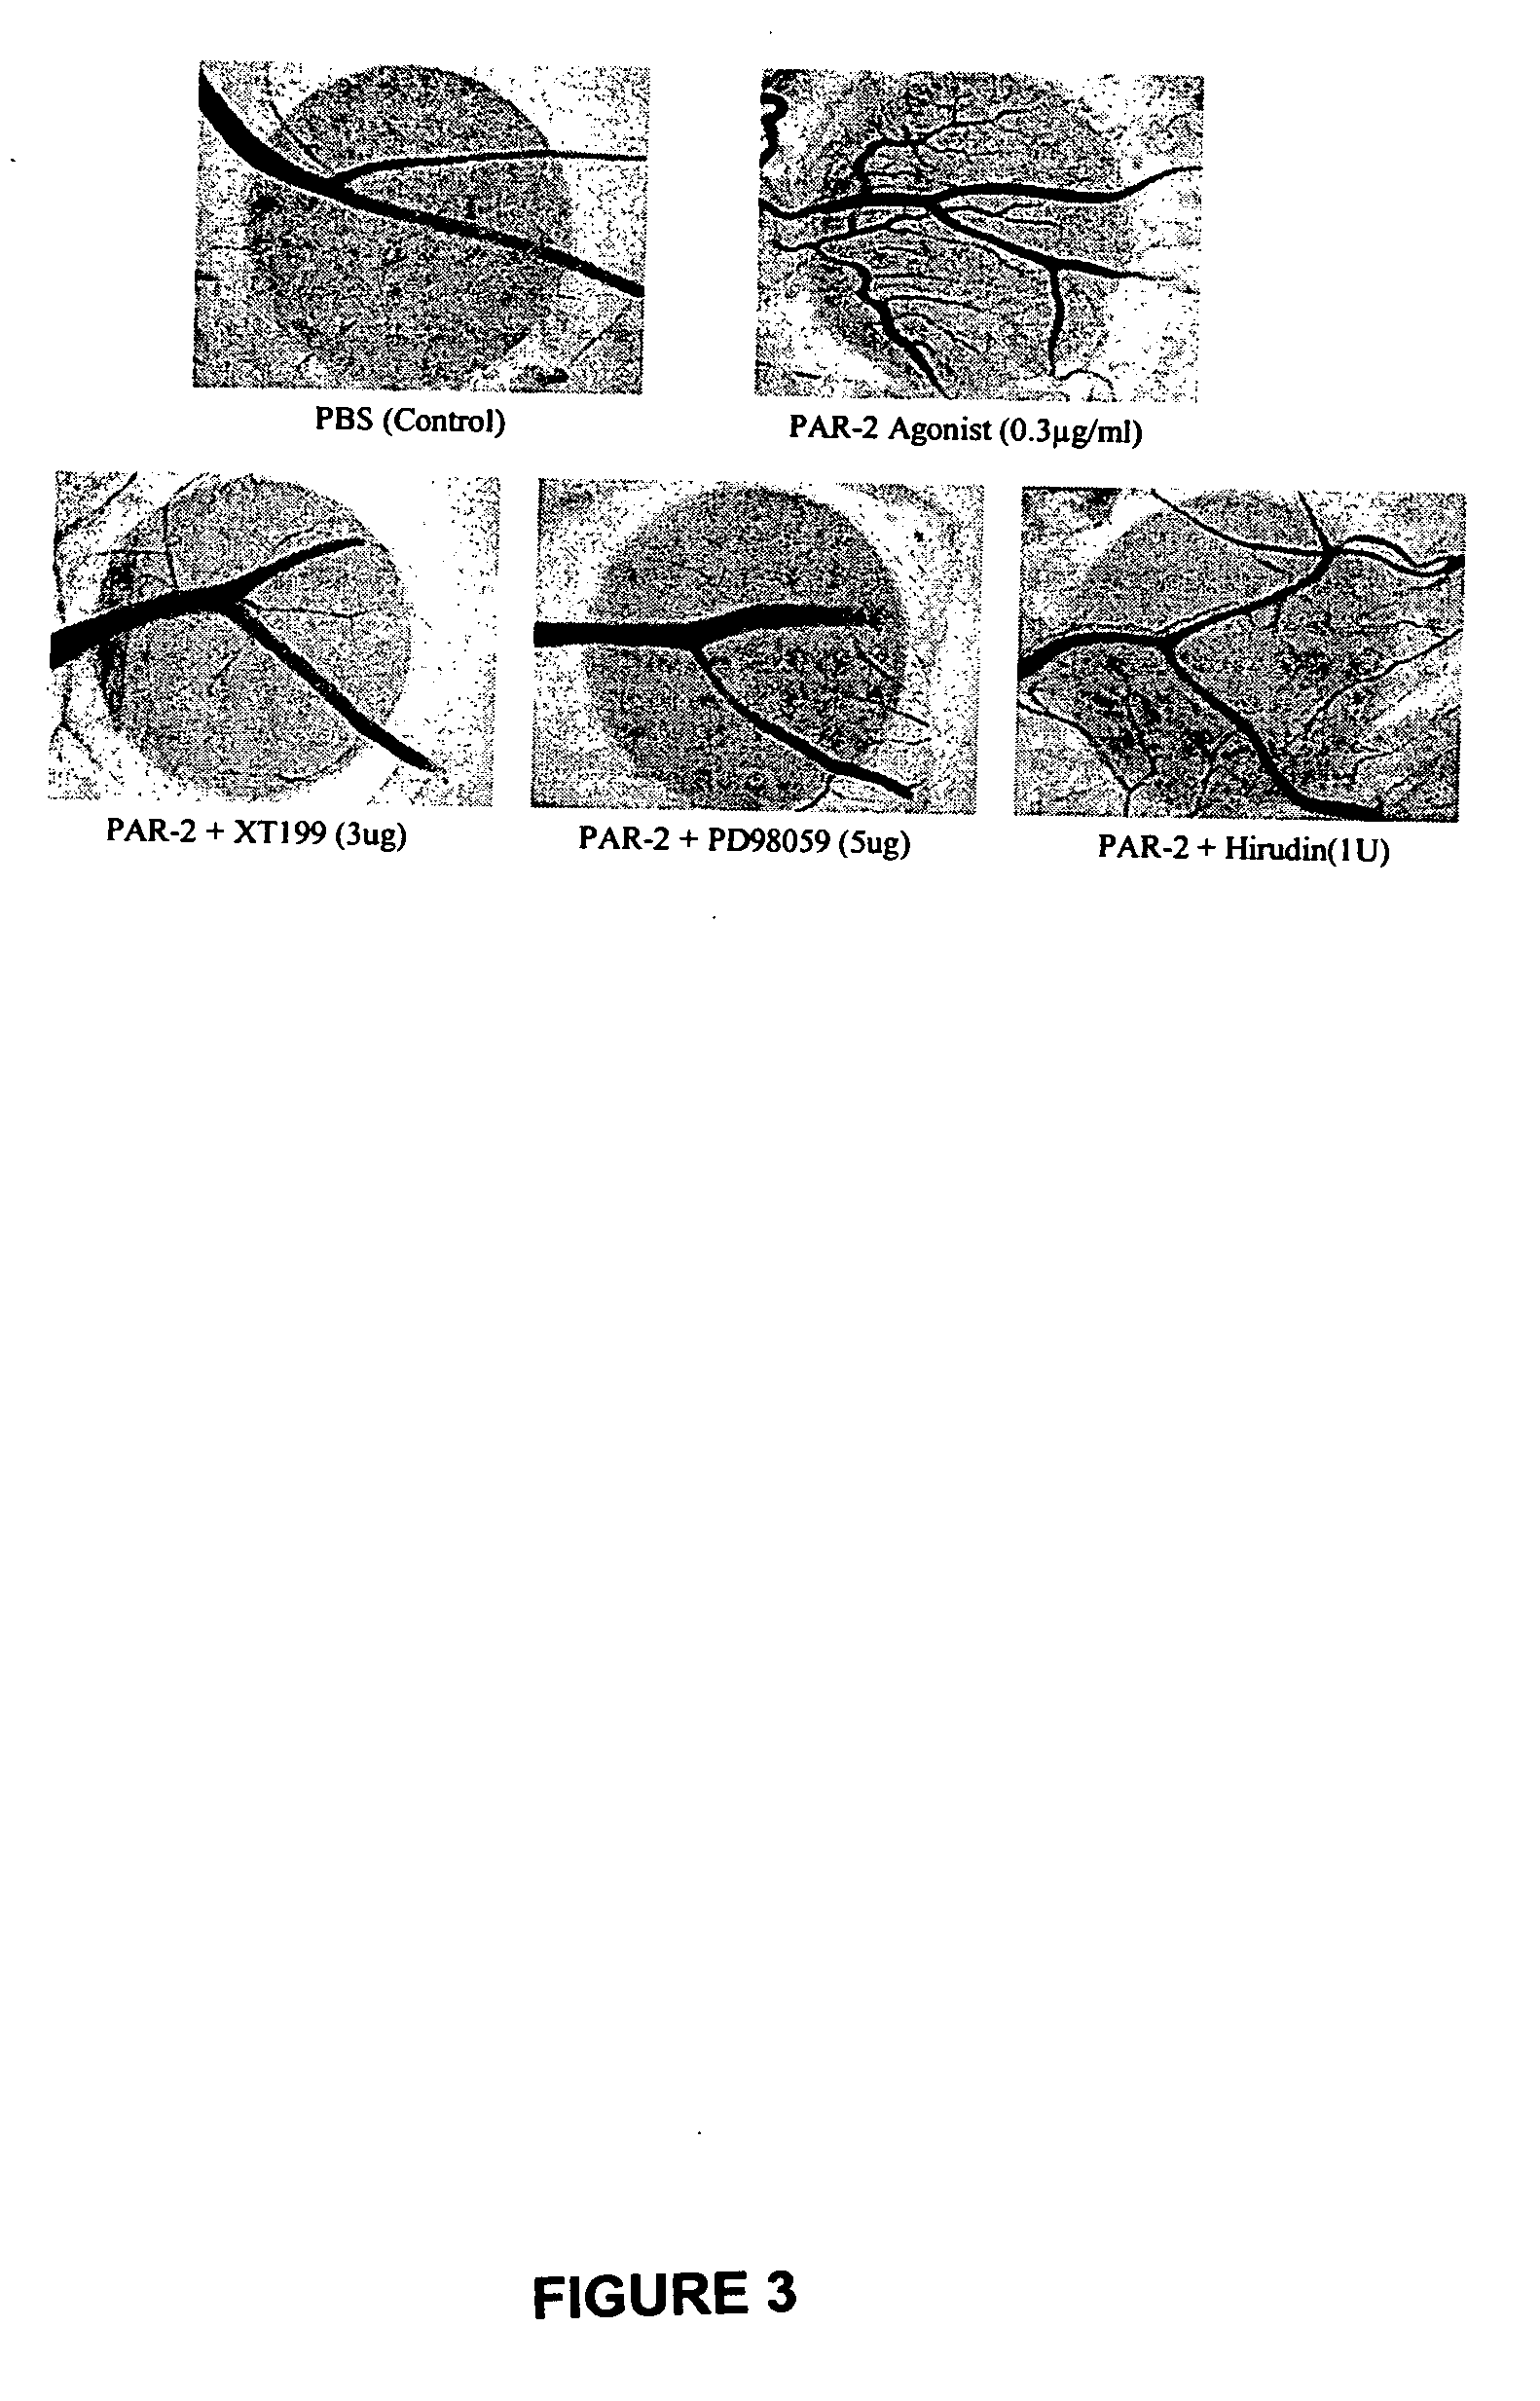 Activators and inhibitors of protease activated receptor2 (PAR2) and methods of use